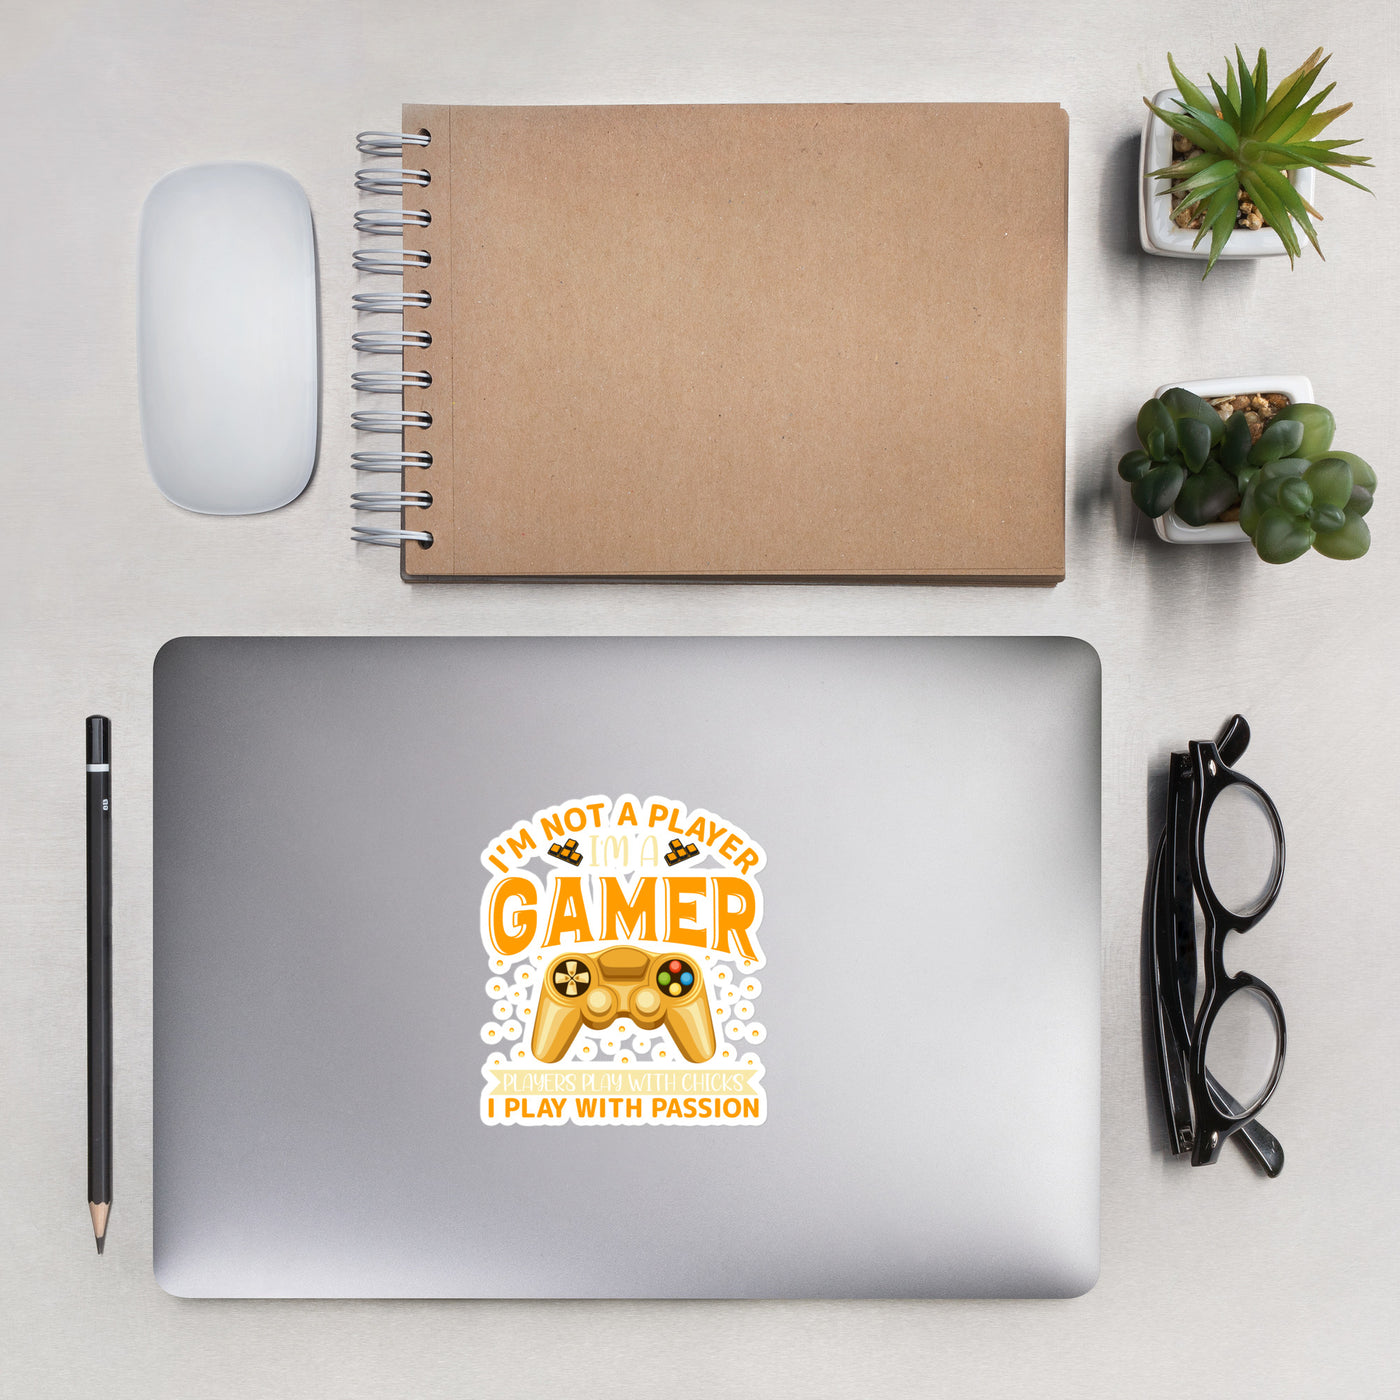 I am not a Player, I am a Gamer; Player plays with Chicks, I play with Passion - Bubble-free stickers